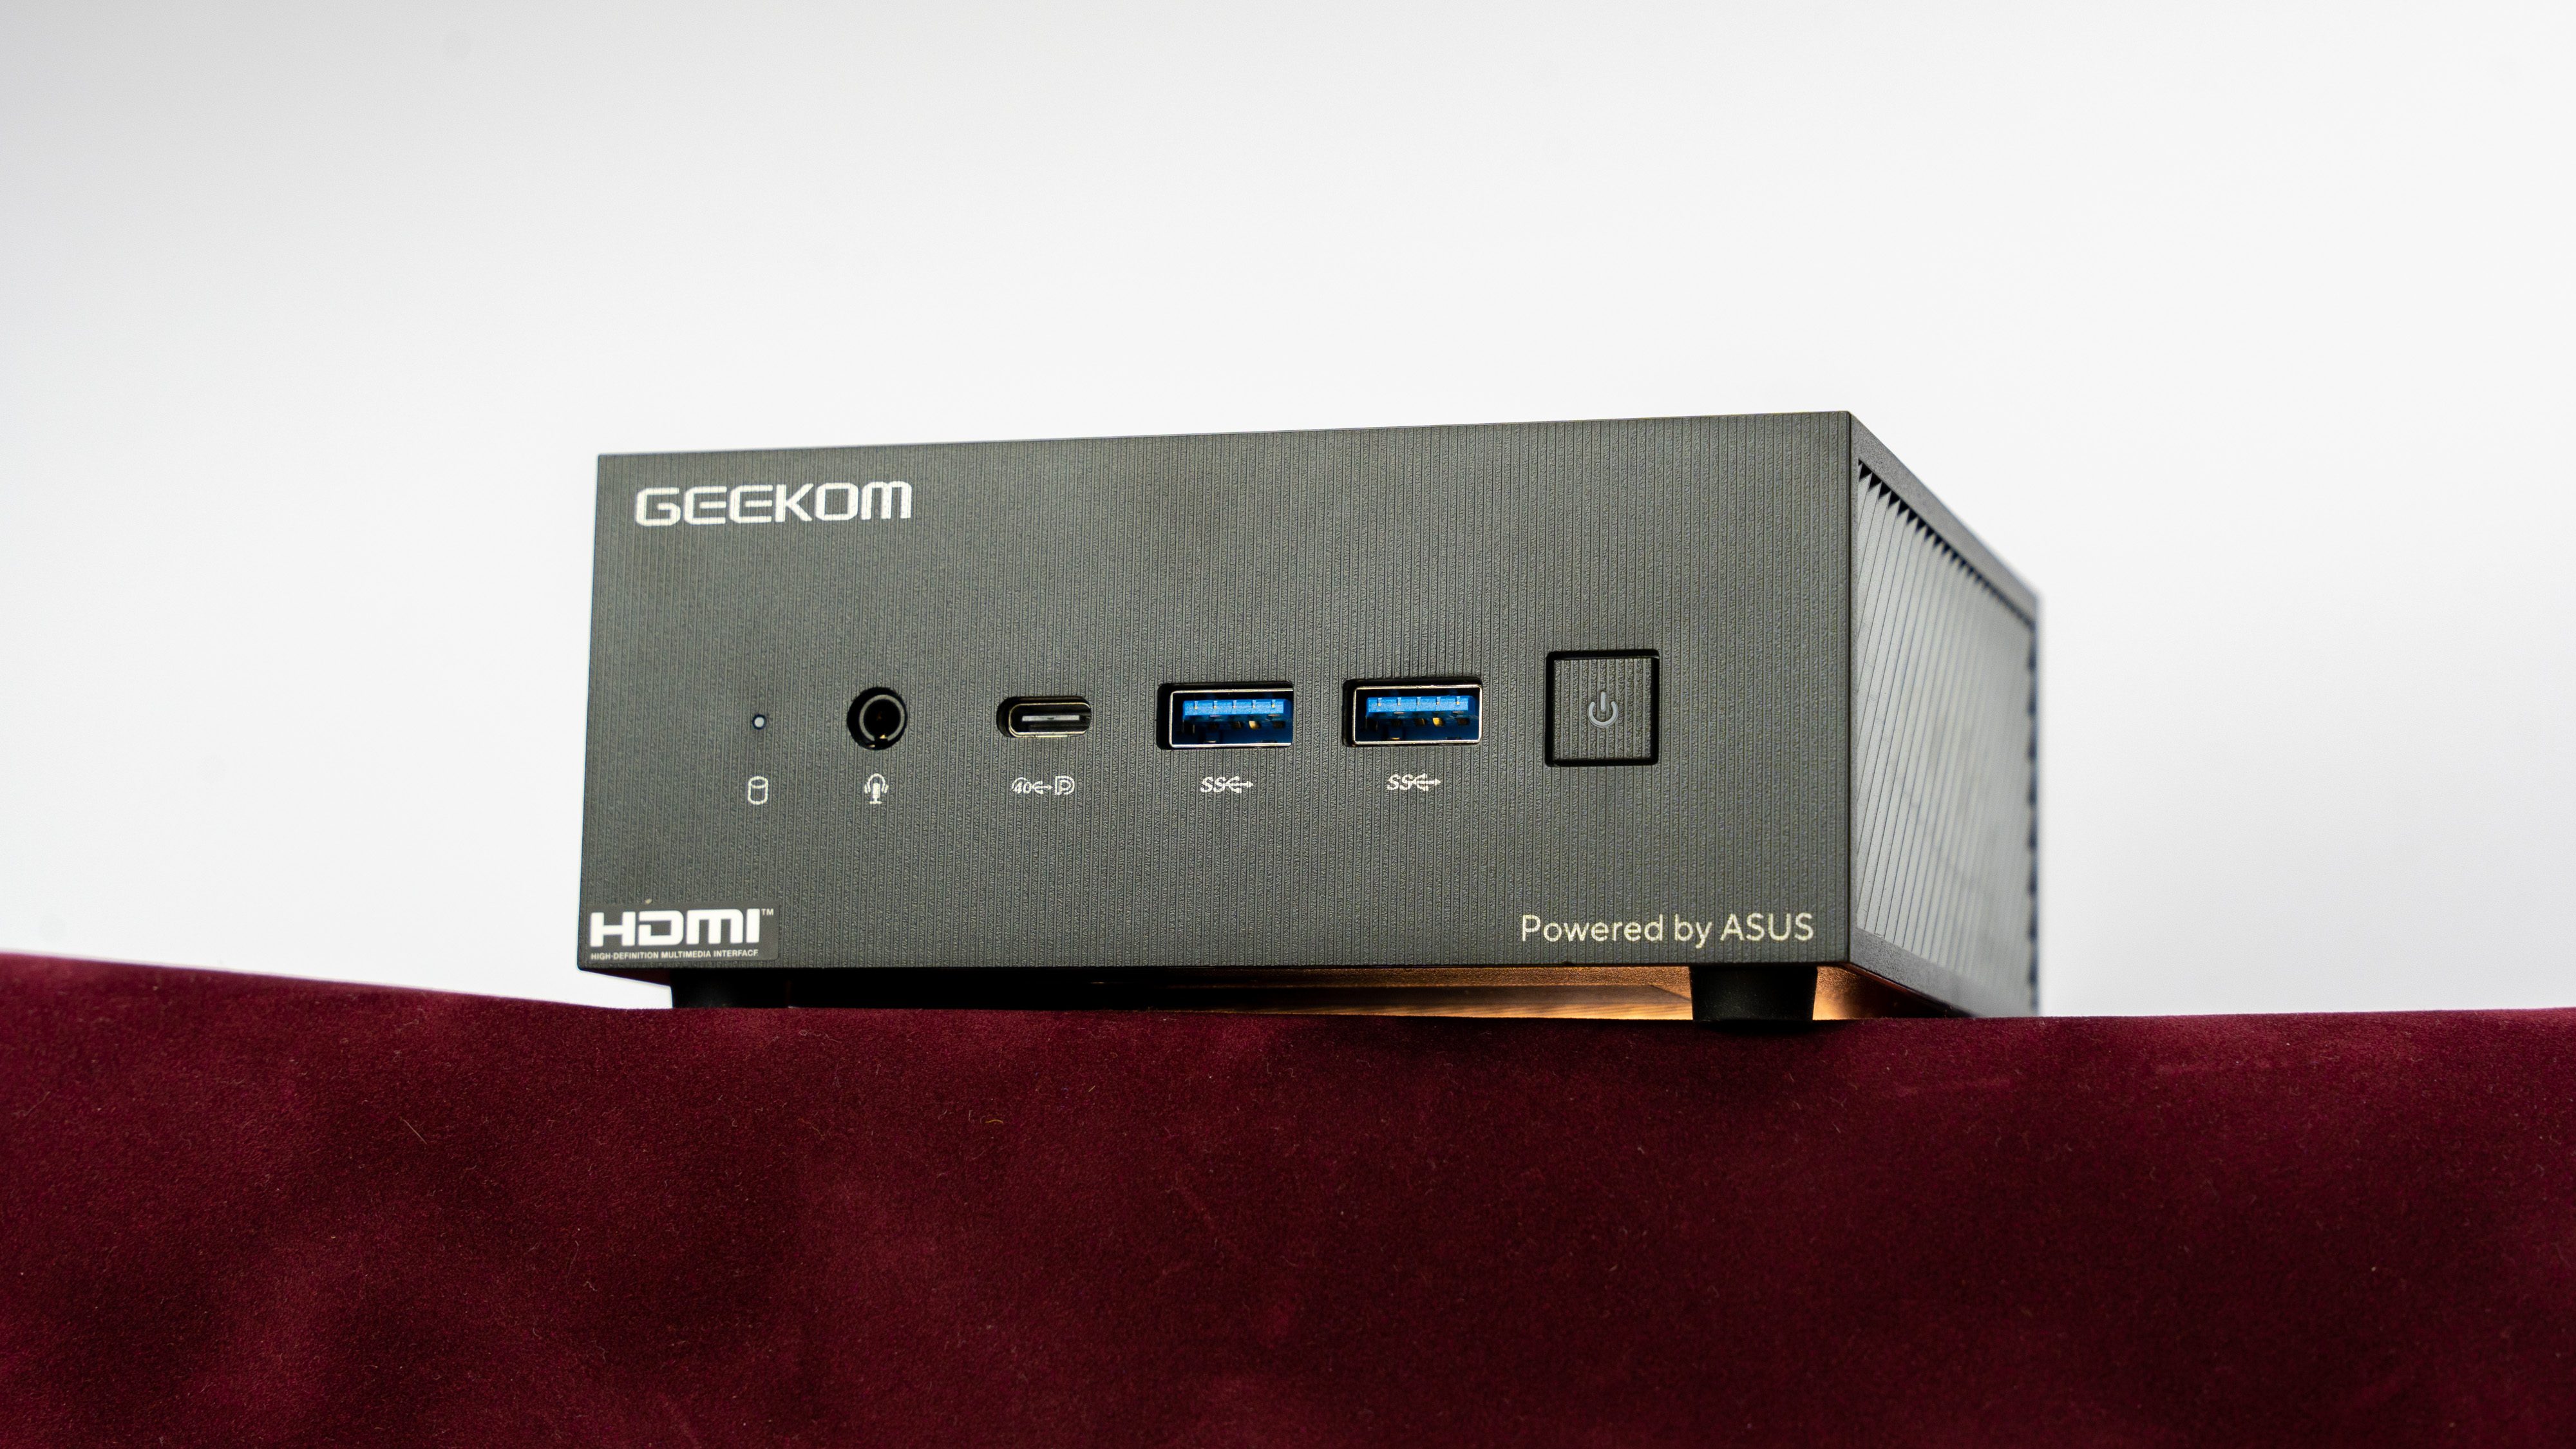 Geekom AS 6 Review: Does the AMD Model Beat the Intel Variant